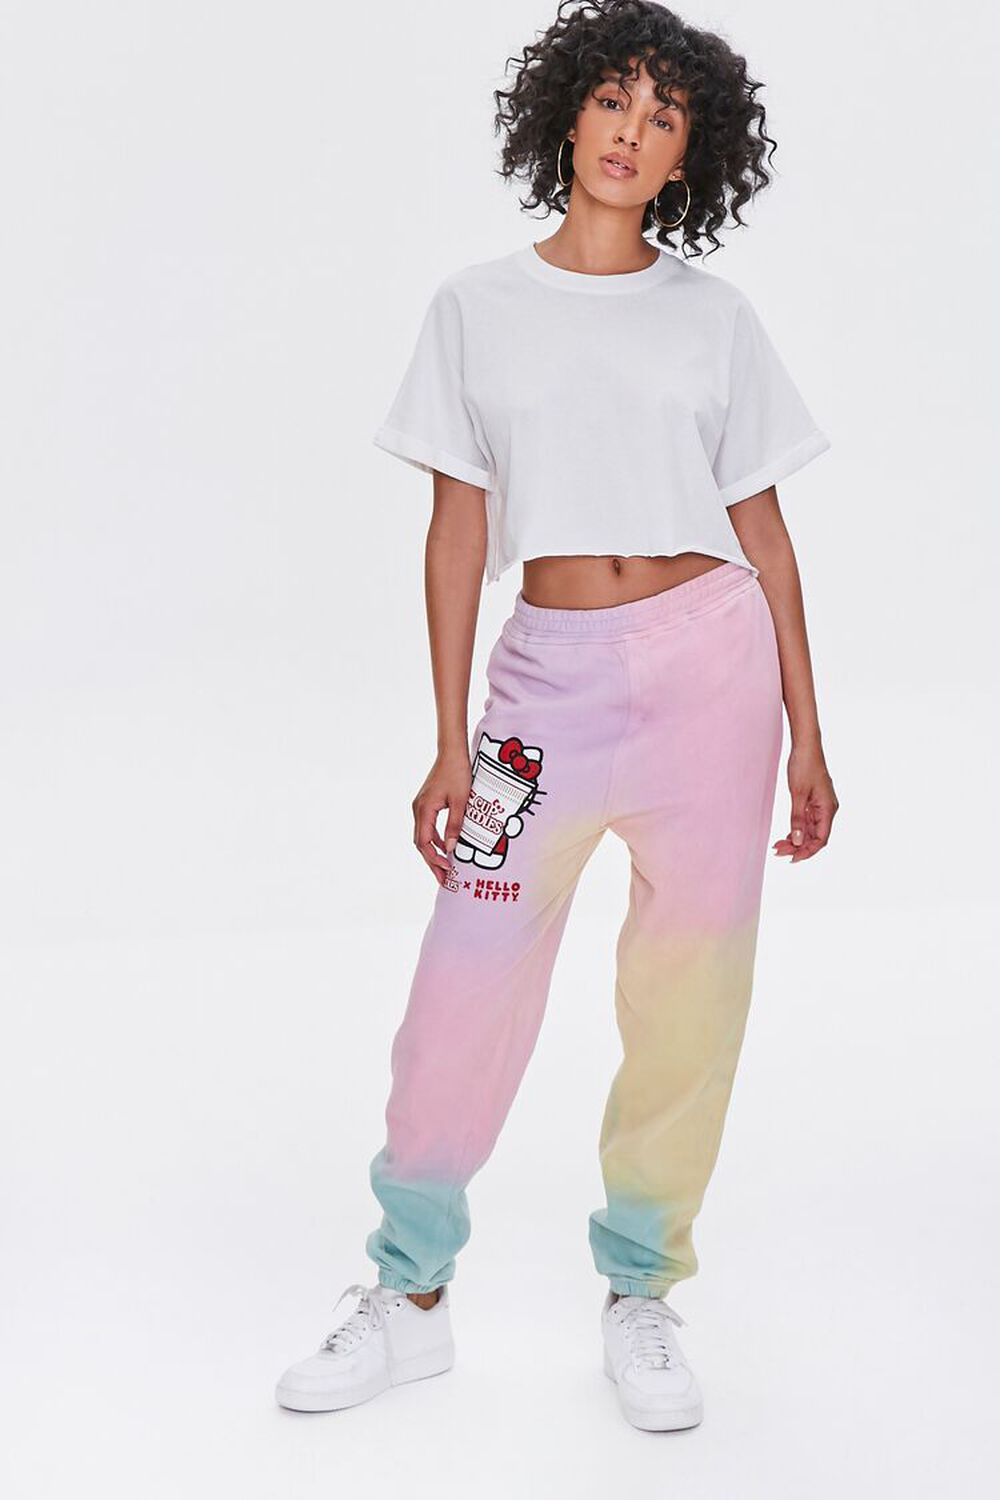 PINK/MULTI Cup Noodles x Hello Kitty Joggers, image 1